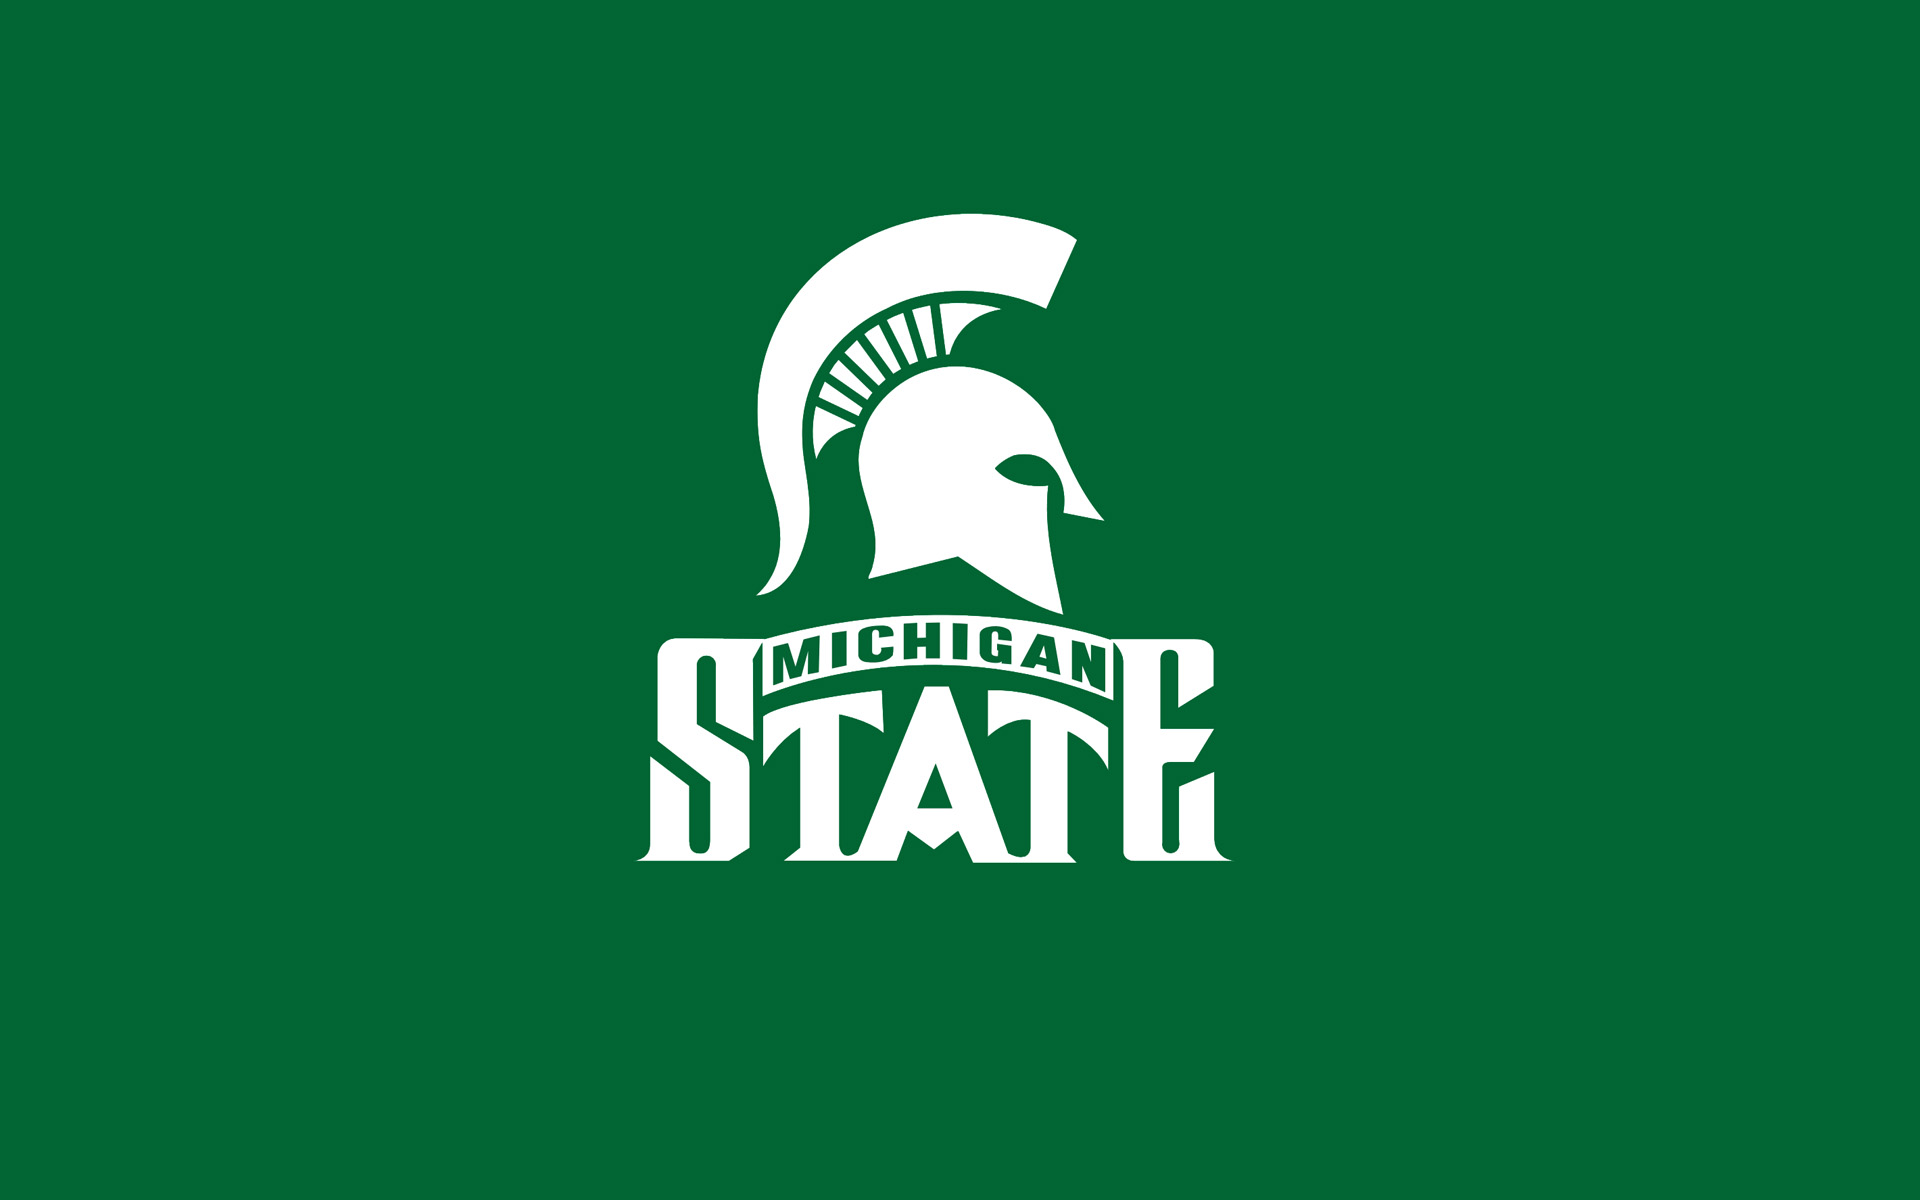 Michigan State Wallpaper Pictures (66+ images)